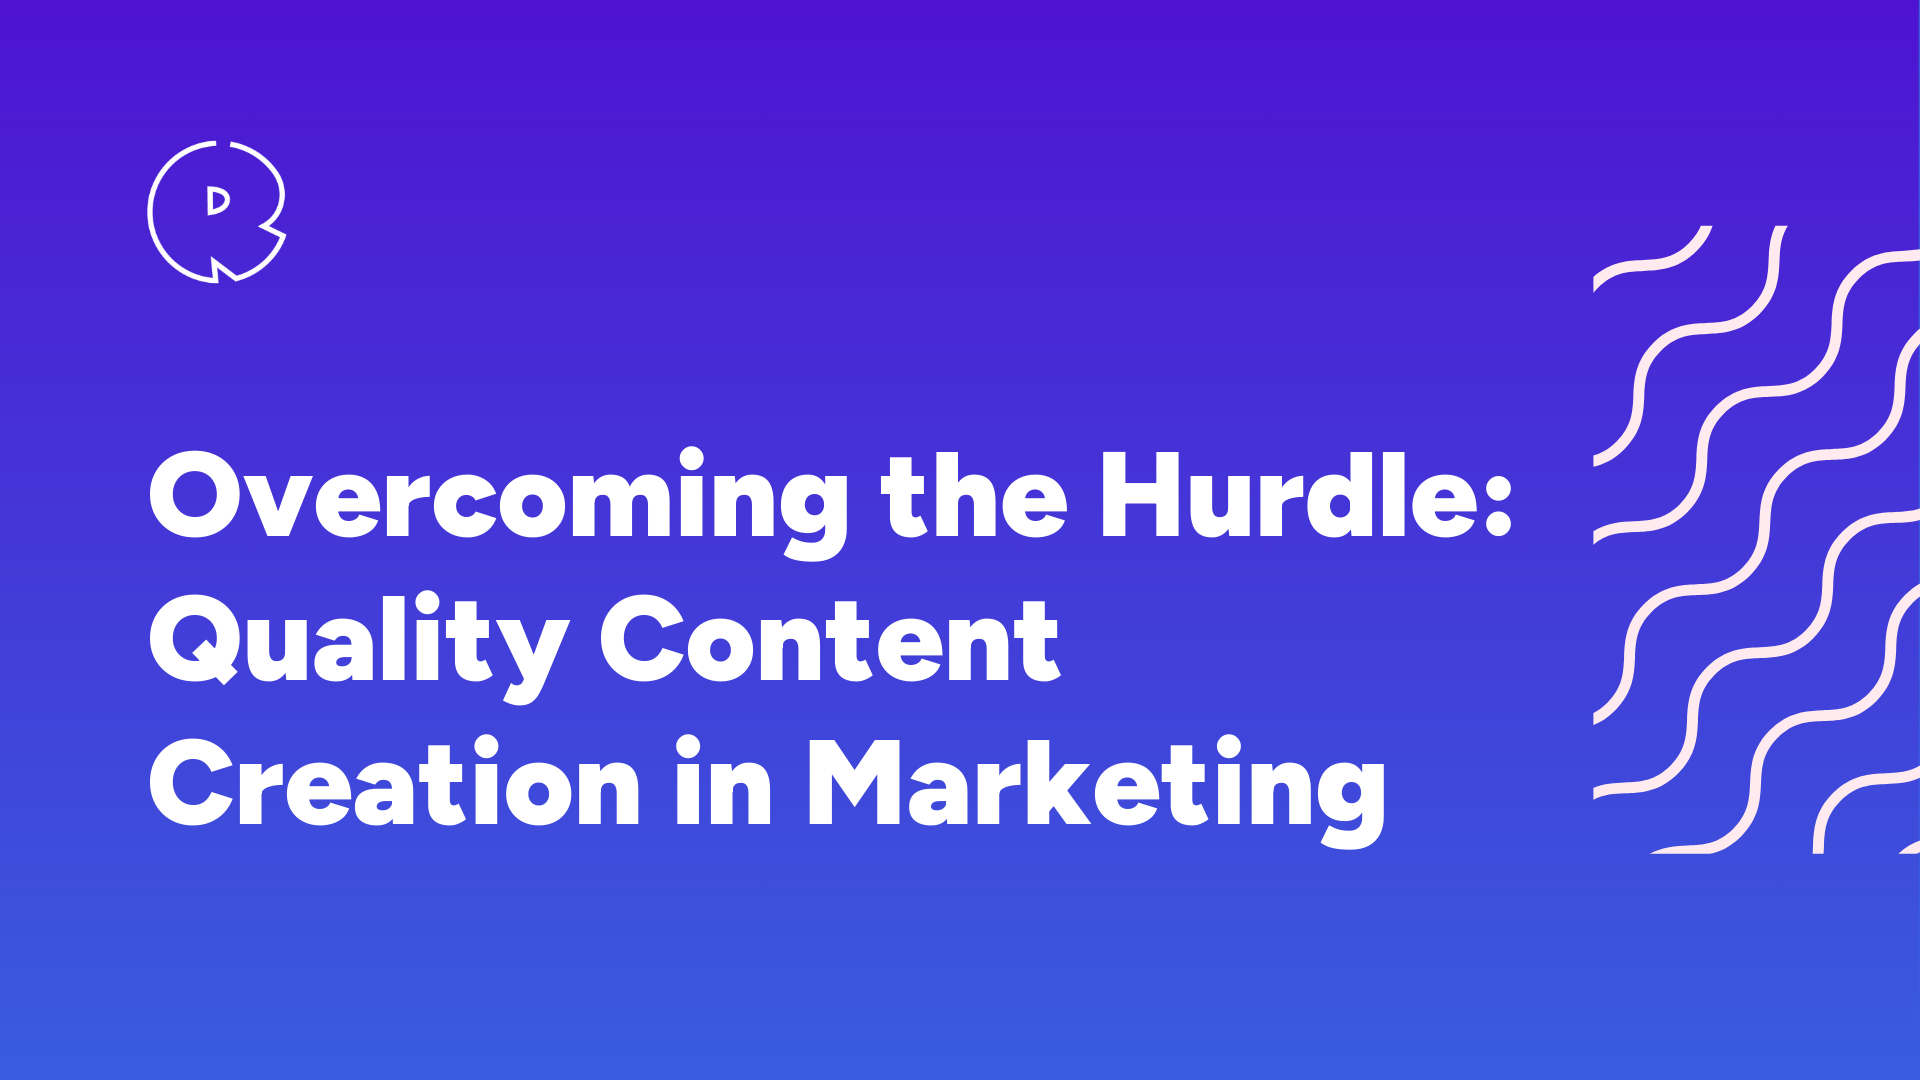 Overcoming the Hurdle: Quality Content Creation in Marketing